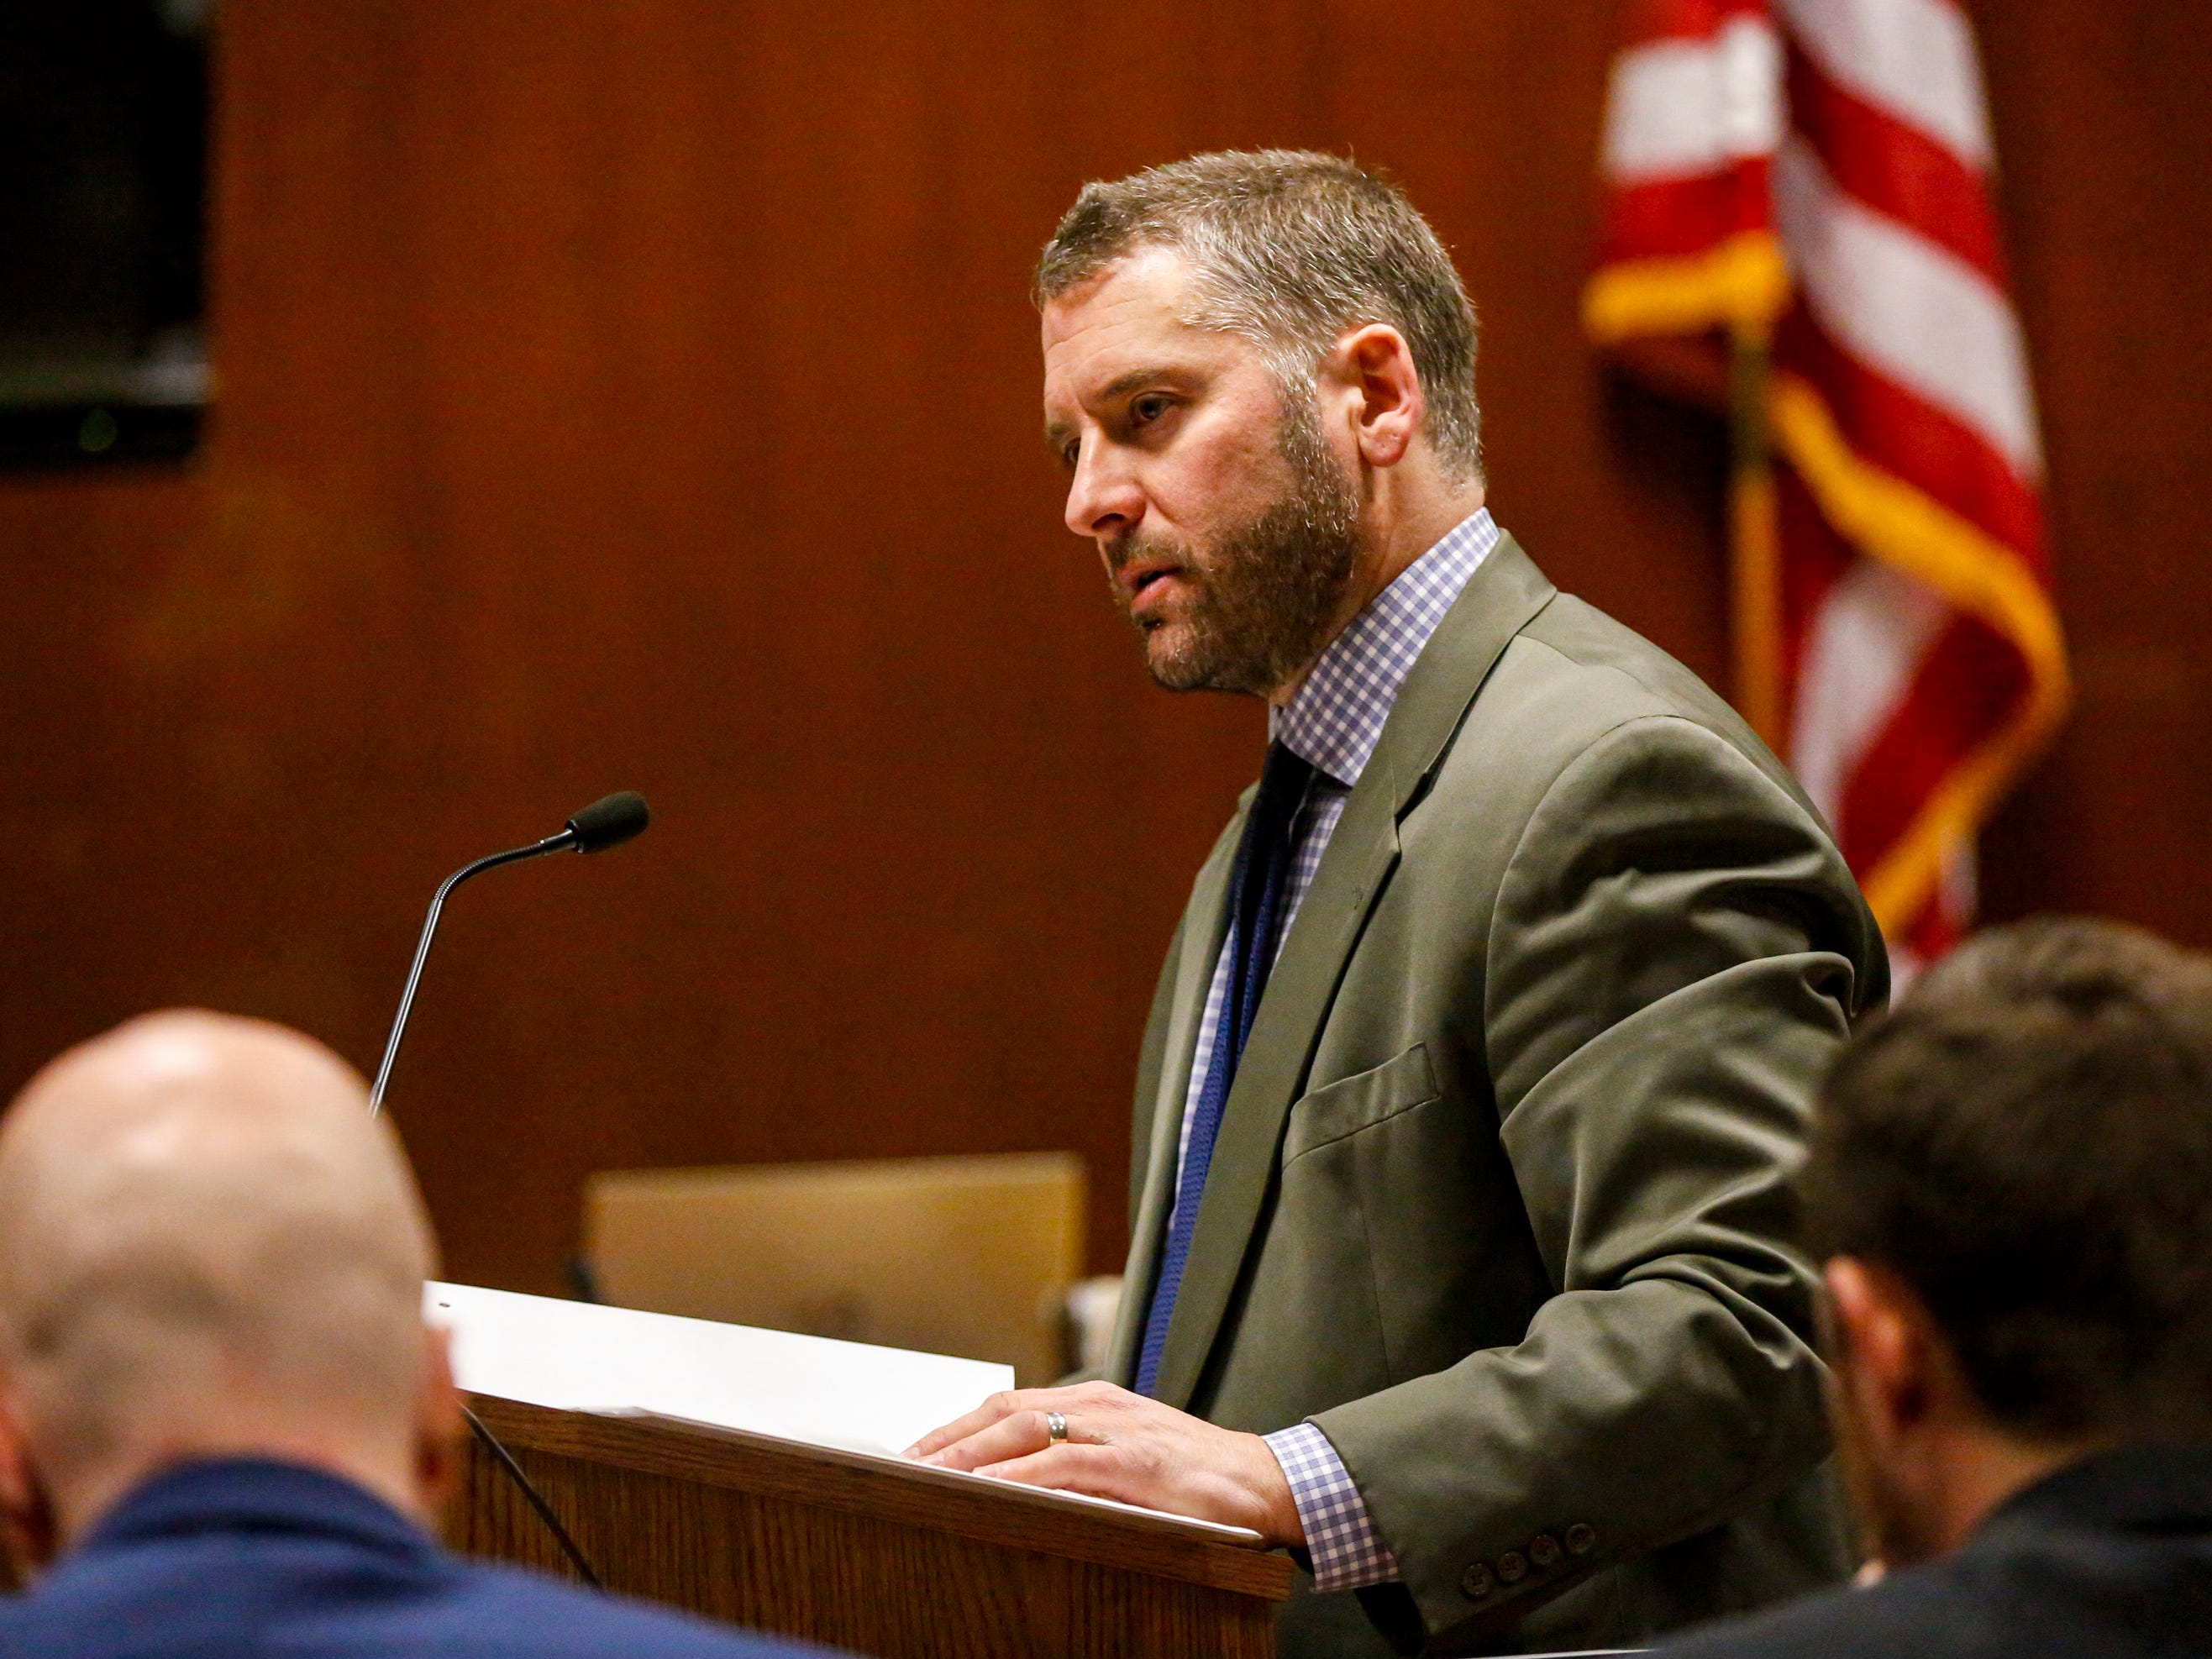 First Assistant Linn County Attorney Nick Maybanks gives an opening statement during the trial of Jerry Burns at the Scott County Courthouse in Davenport on Wednesday, Feb. 12, 2020.